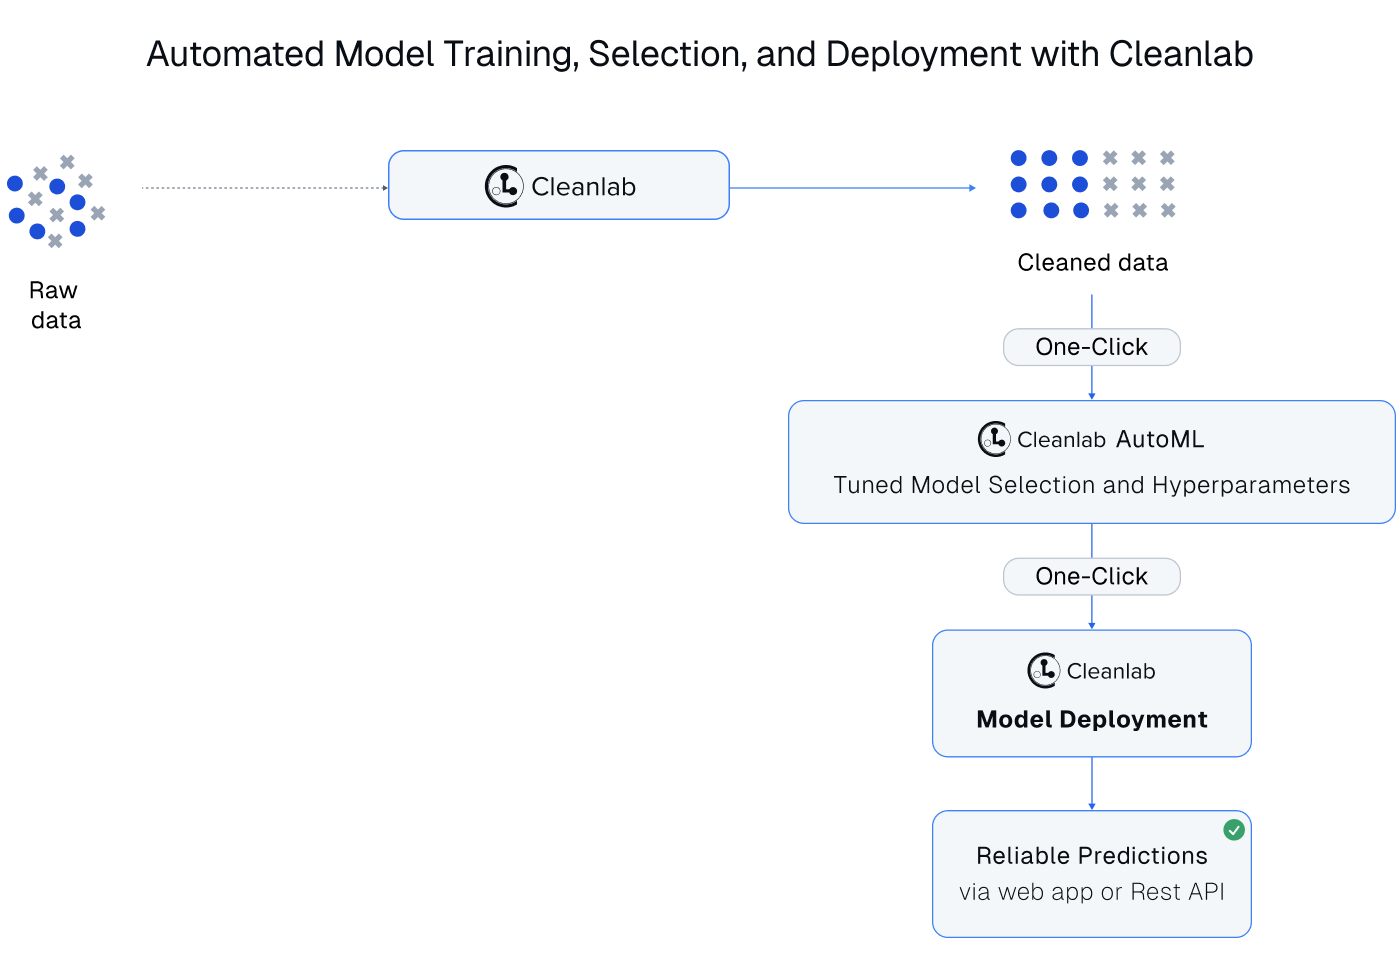 Workflow to quickly deploy a reliable machine learning model